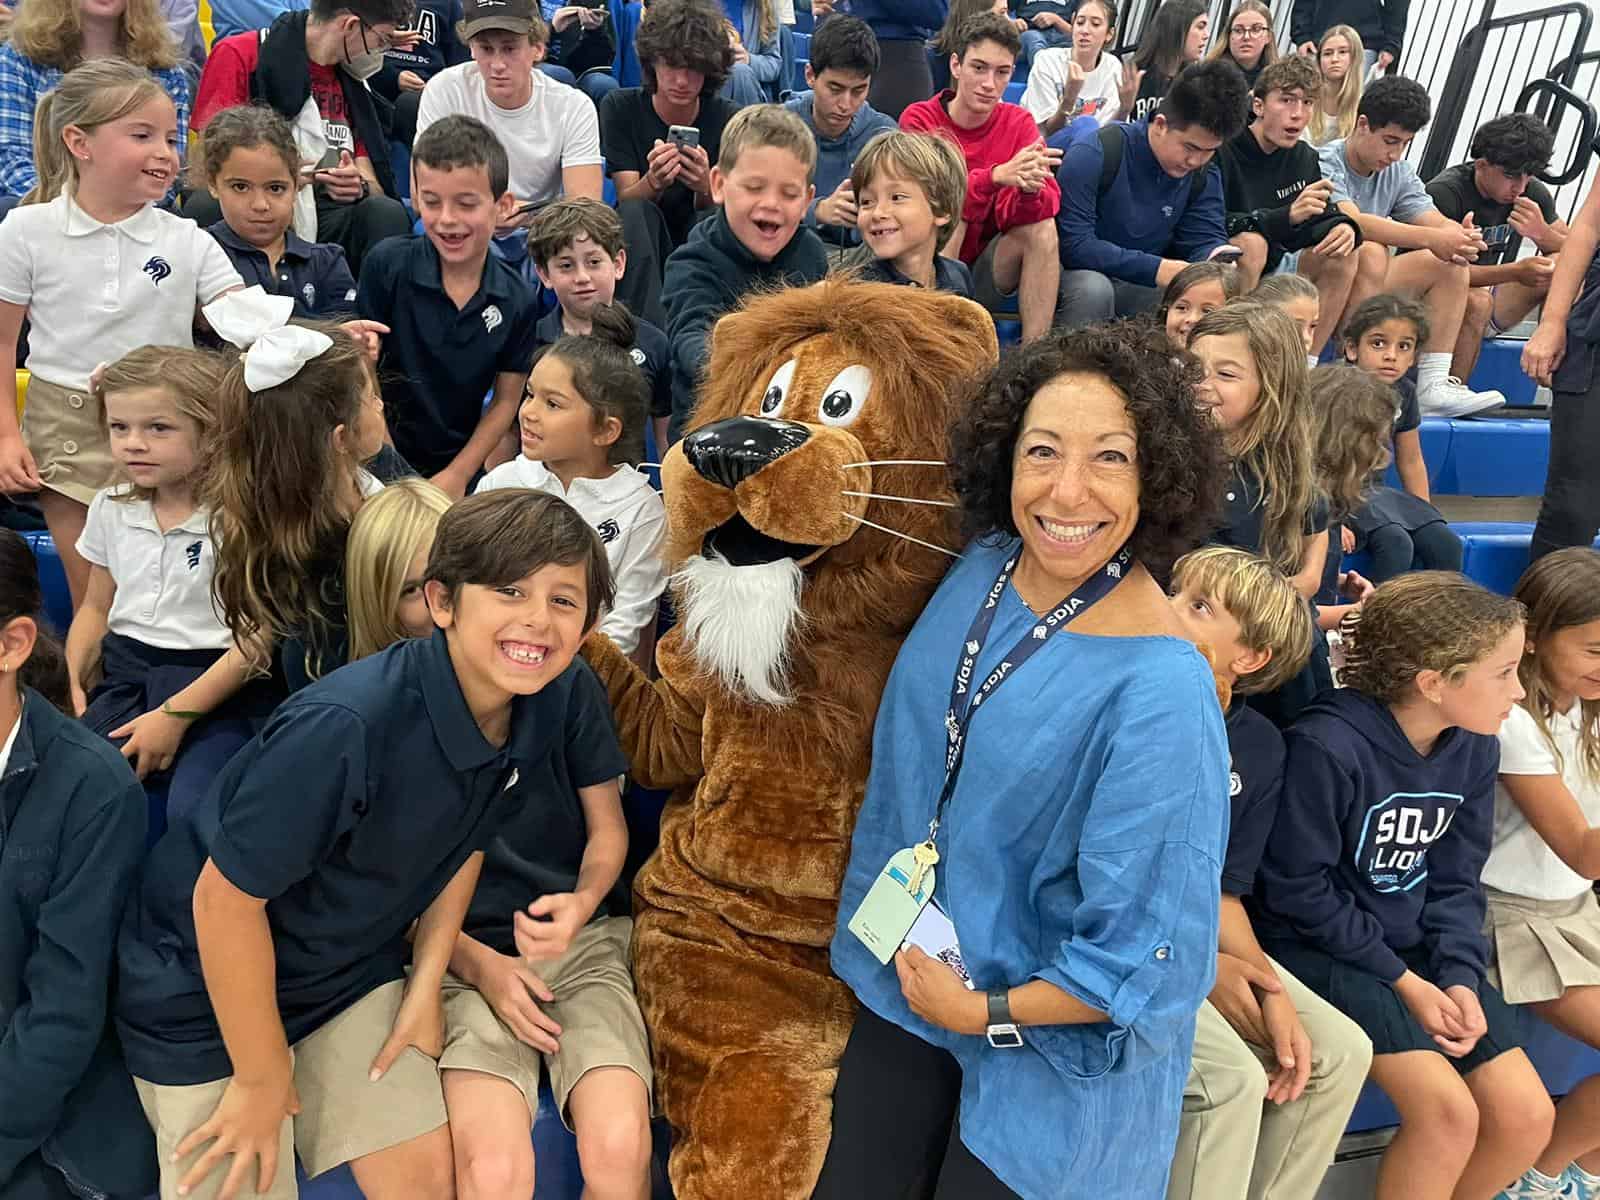 SDJA students and teacher with school mascot in the gym during an event.